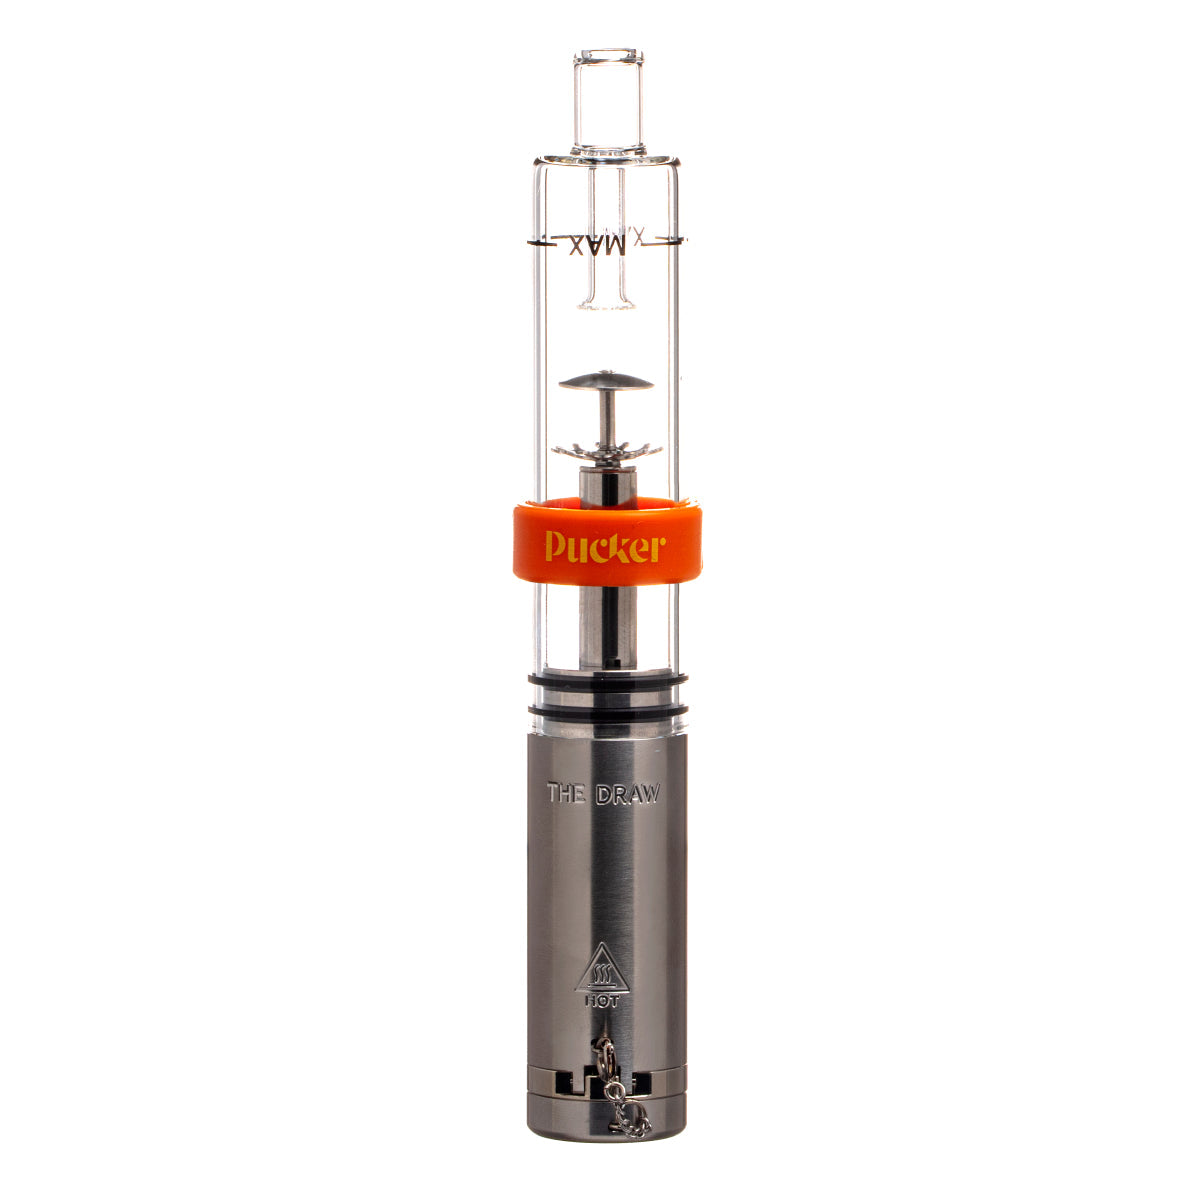 PUCKER "The Draw" Dry Herb Water Pipe - (1 Count)-Vaporizers, E-Cigs, and Batteries